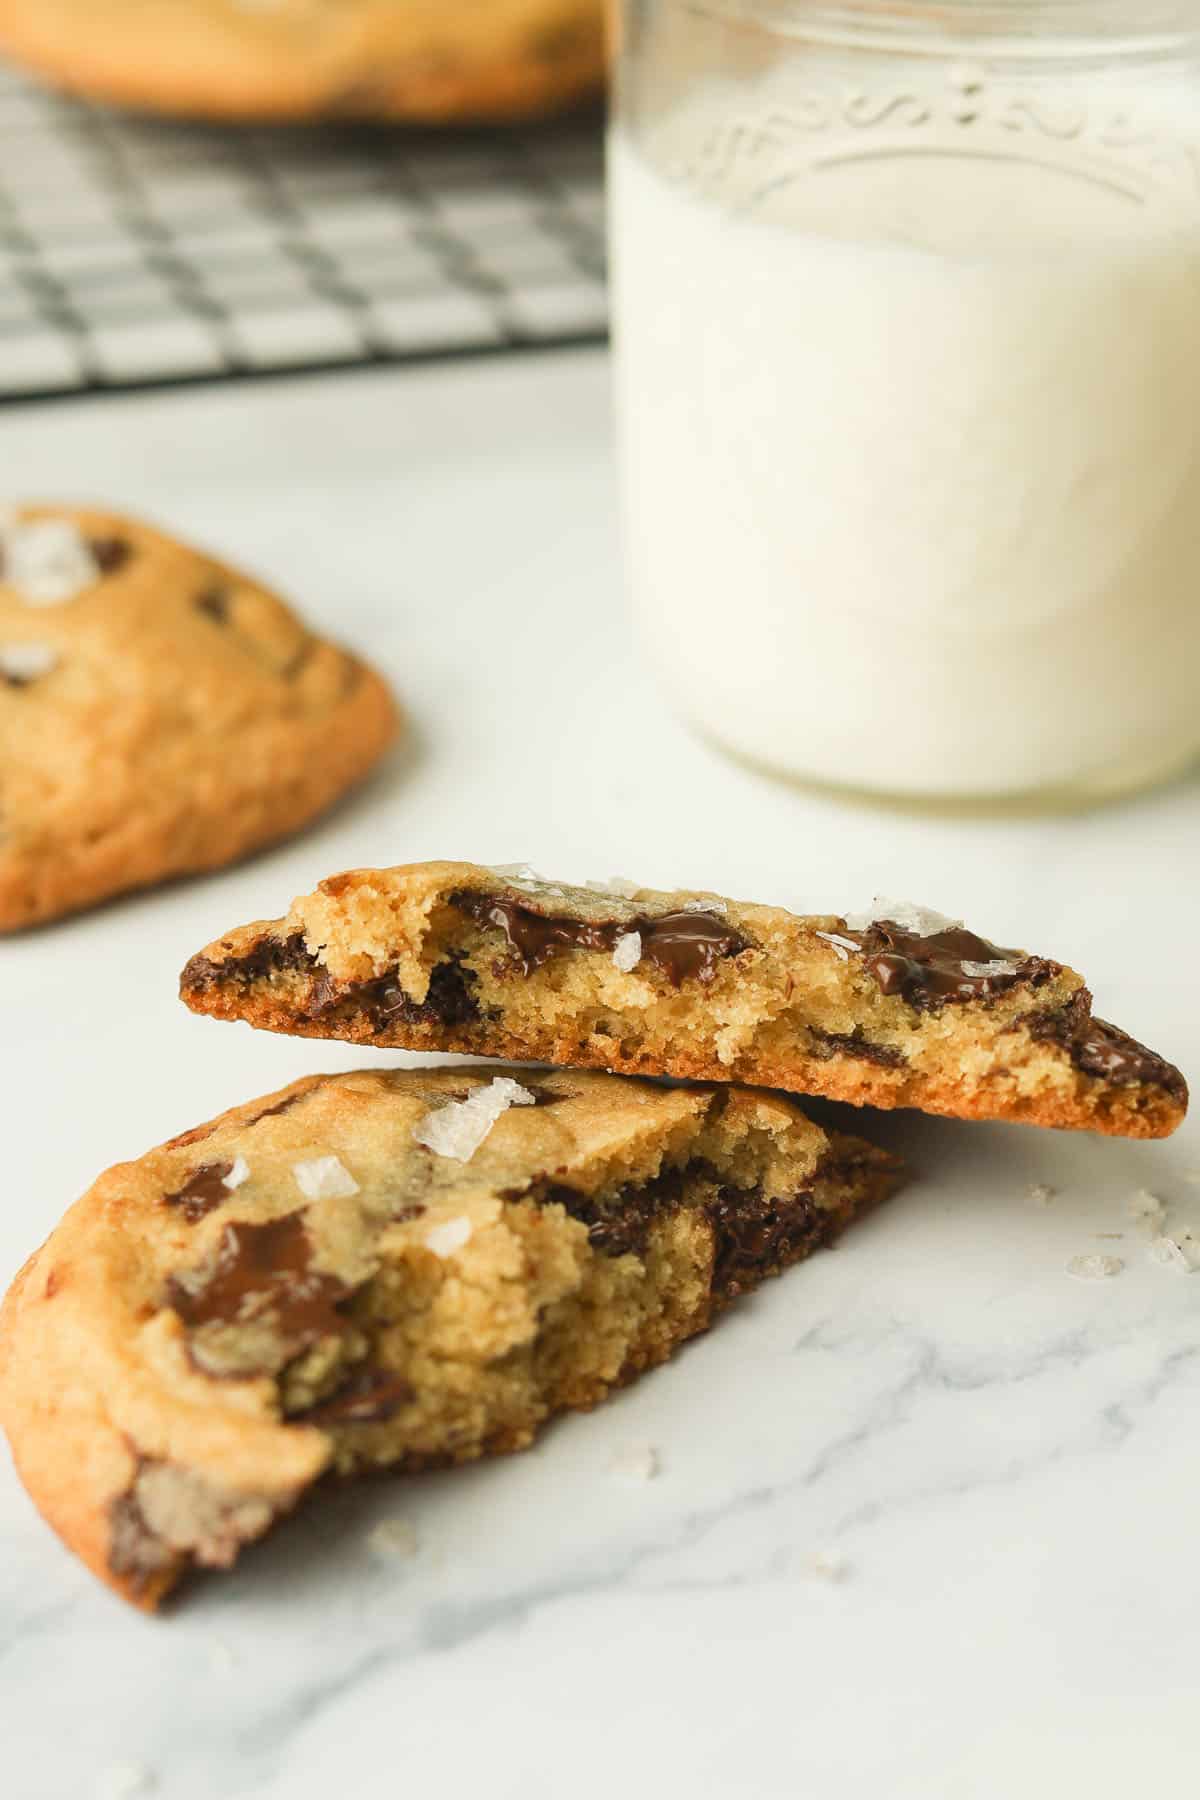 Chocolate chip cookies with milk.